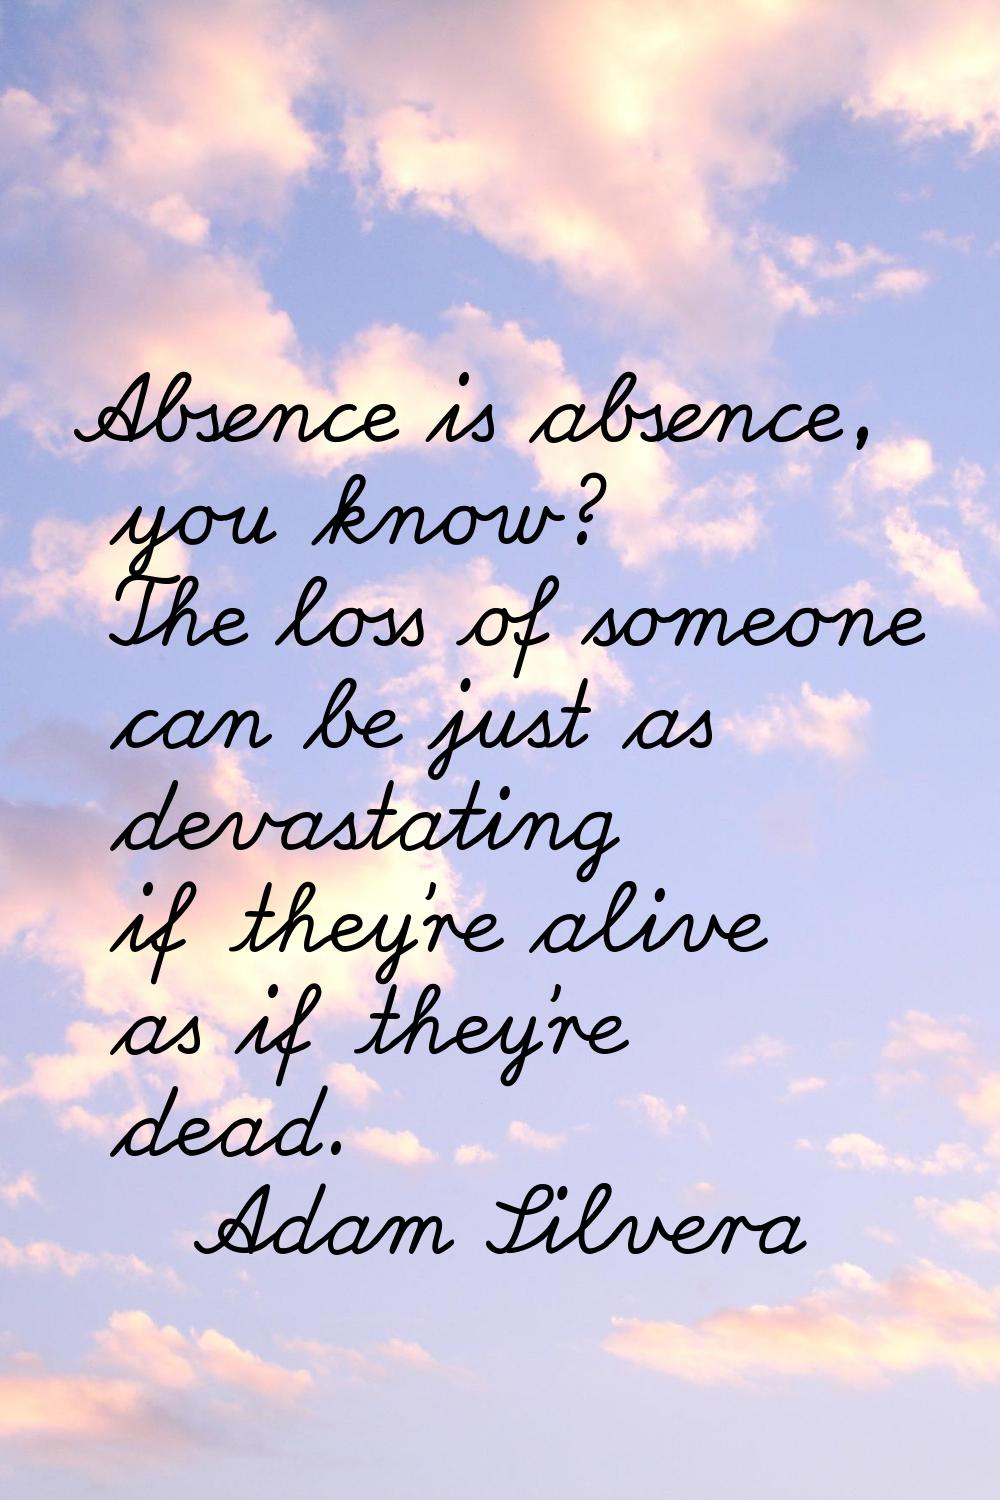 Absence is absence, you know? The loss of someone can be just as devastating if they're alive as if